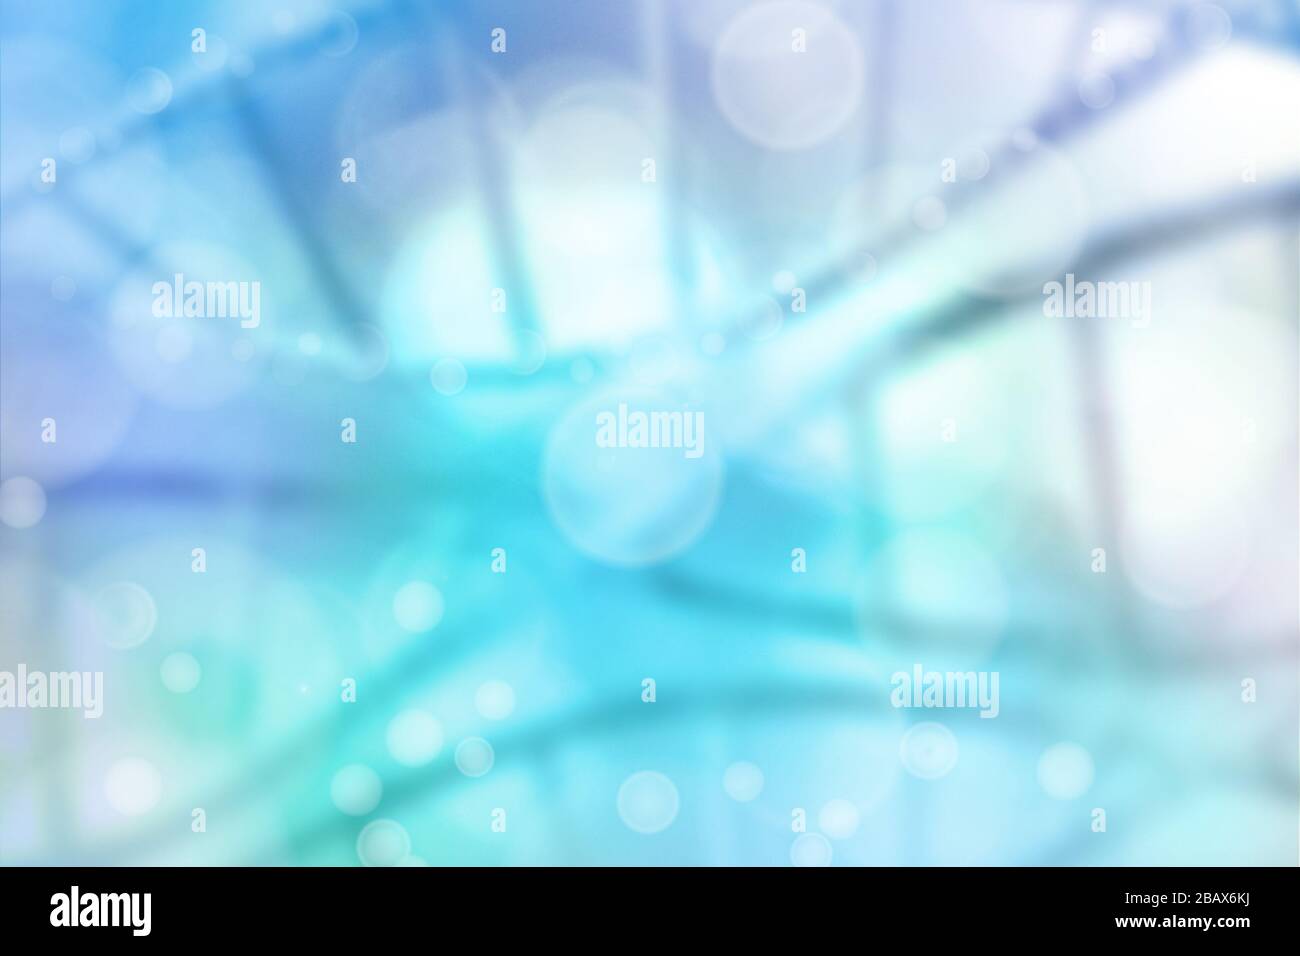 Blue DNA spirales abstract blurred background Stock Photo